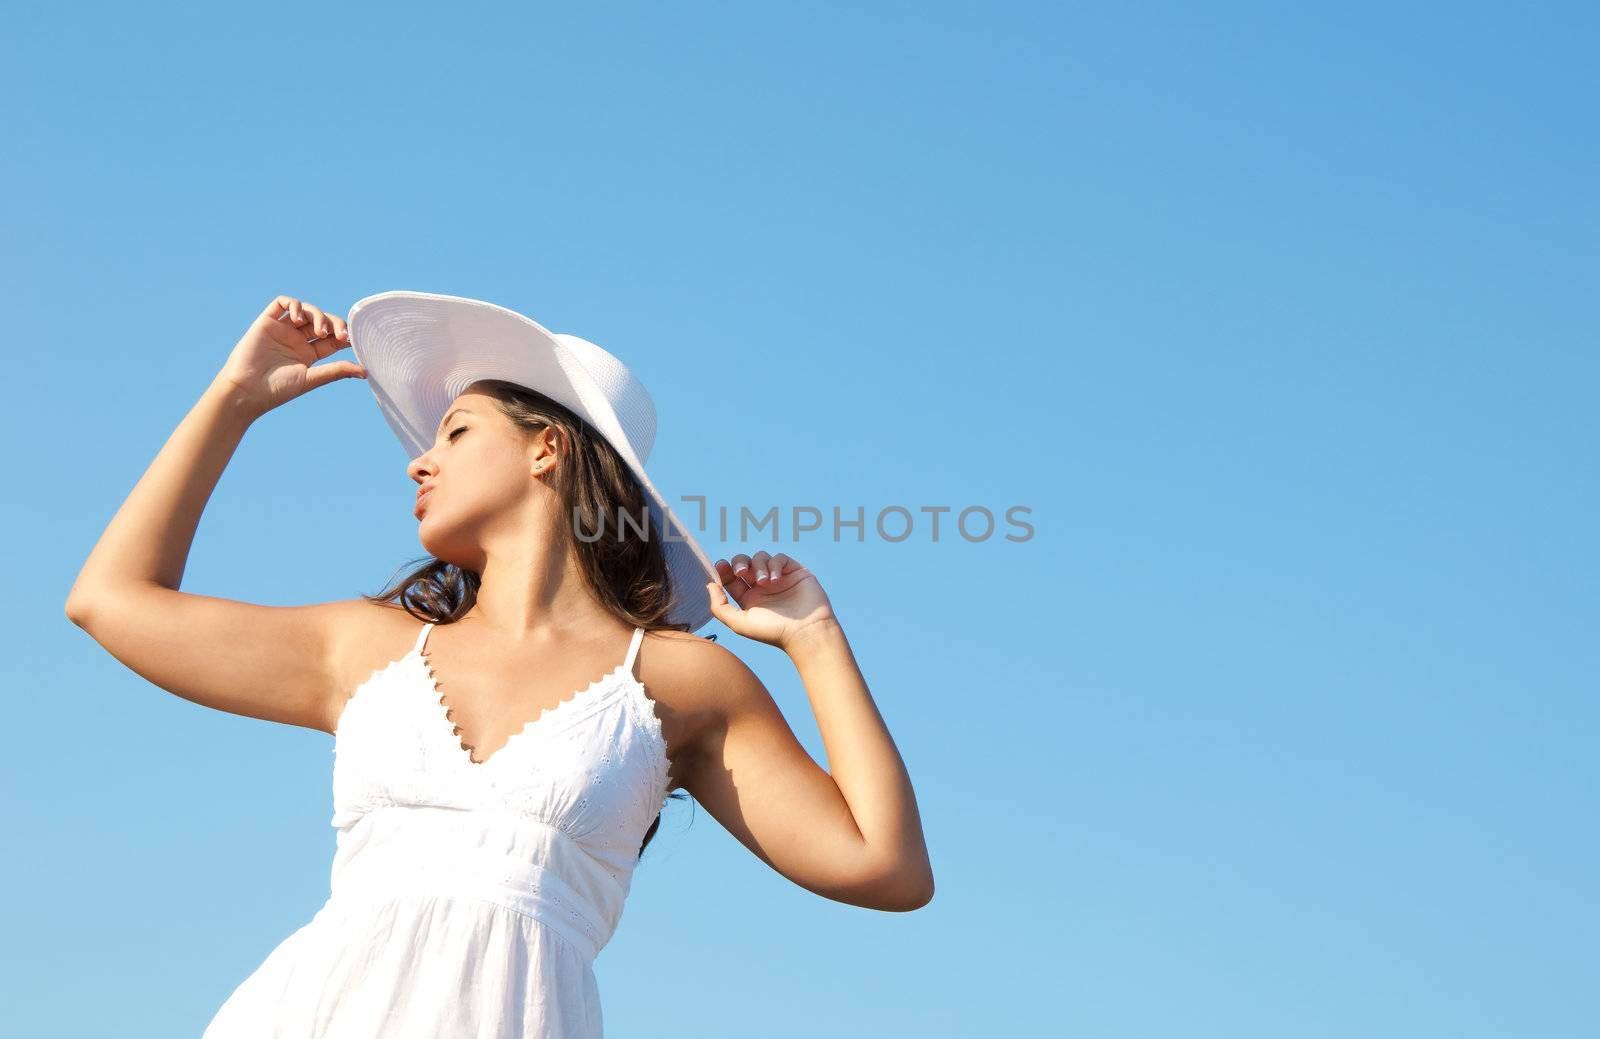 Freedom girl in the sky with white hat and dress